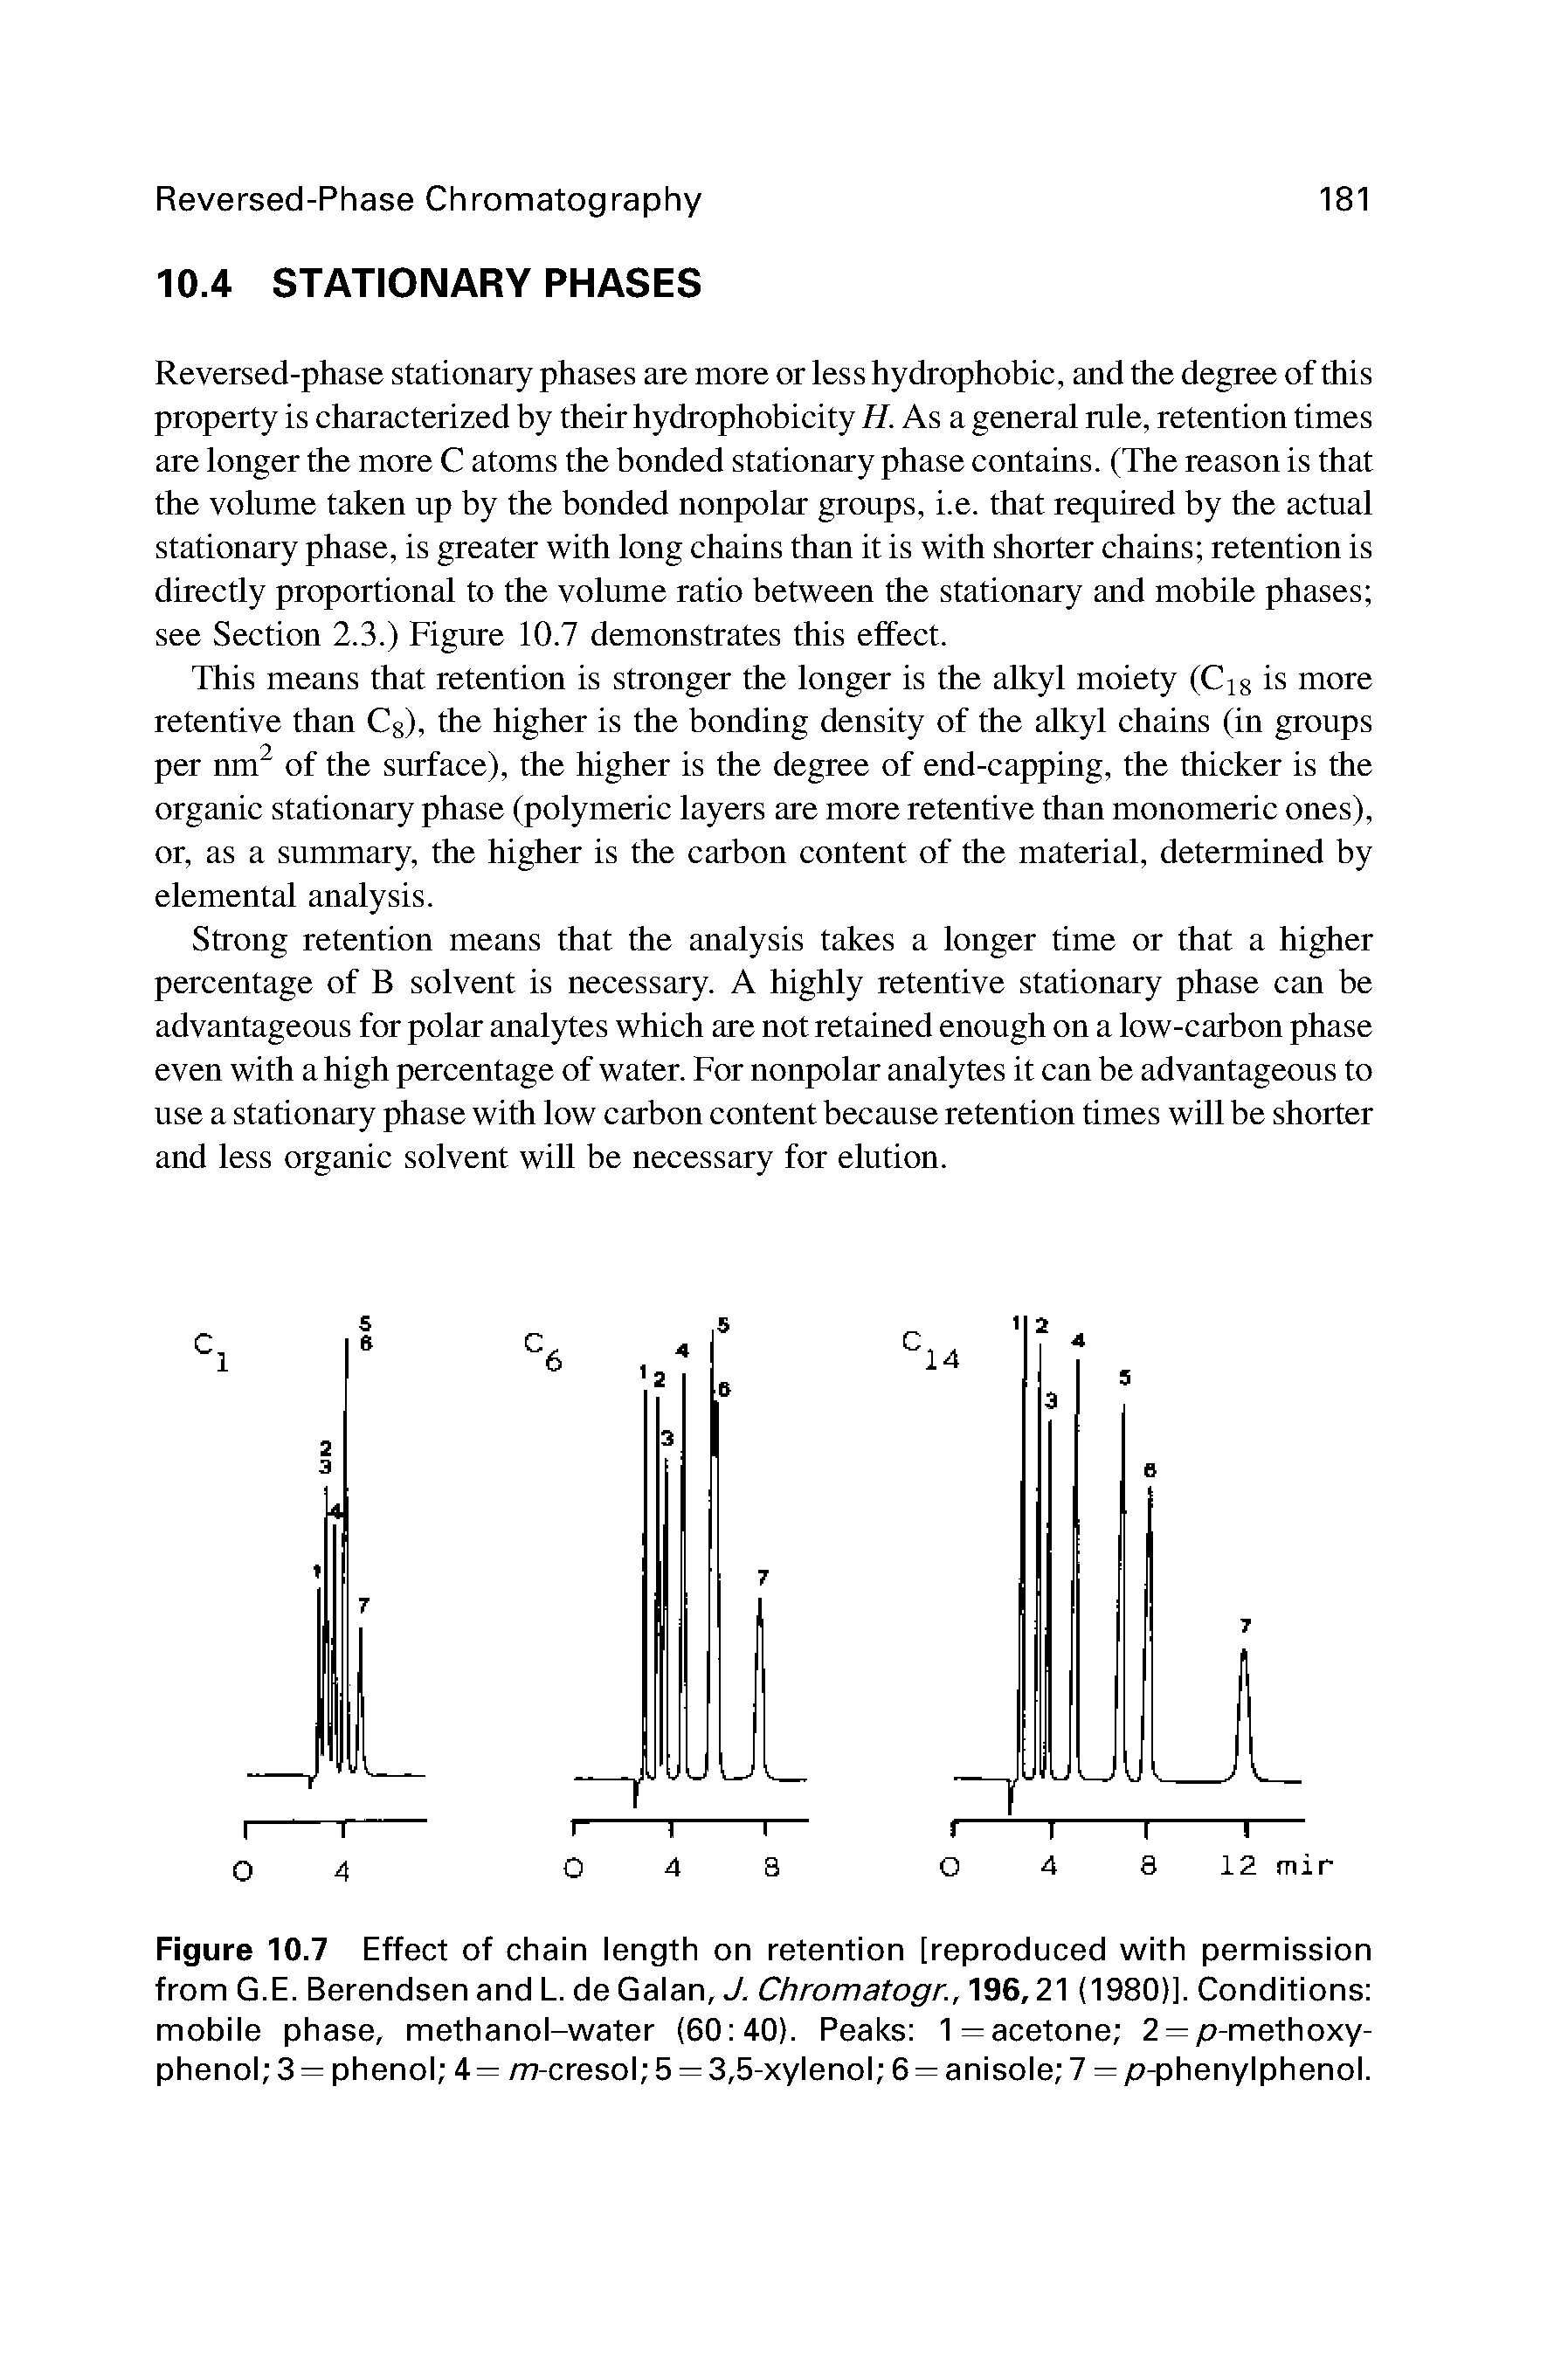 Figure 10.7 Effect of chain length on retention [reproduced with permission from G.E. Berendsen and L. de Galan, J. Chromatogr., 196,21 (1980)]. Conditions mobile phase, methanol-water (60 40). Peaks T— acetone 2 = p-methoxy-phenol 3 — phenol 4-— m-cresol 5 = 3,5-xylenol 6 = anisole 7 = p-phenylphenol.